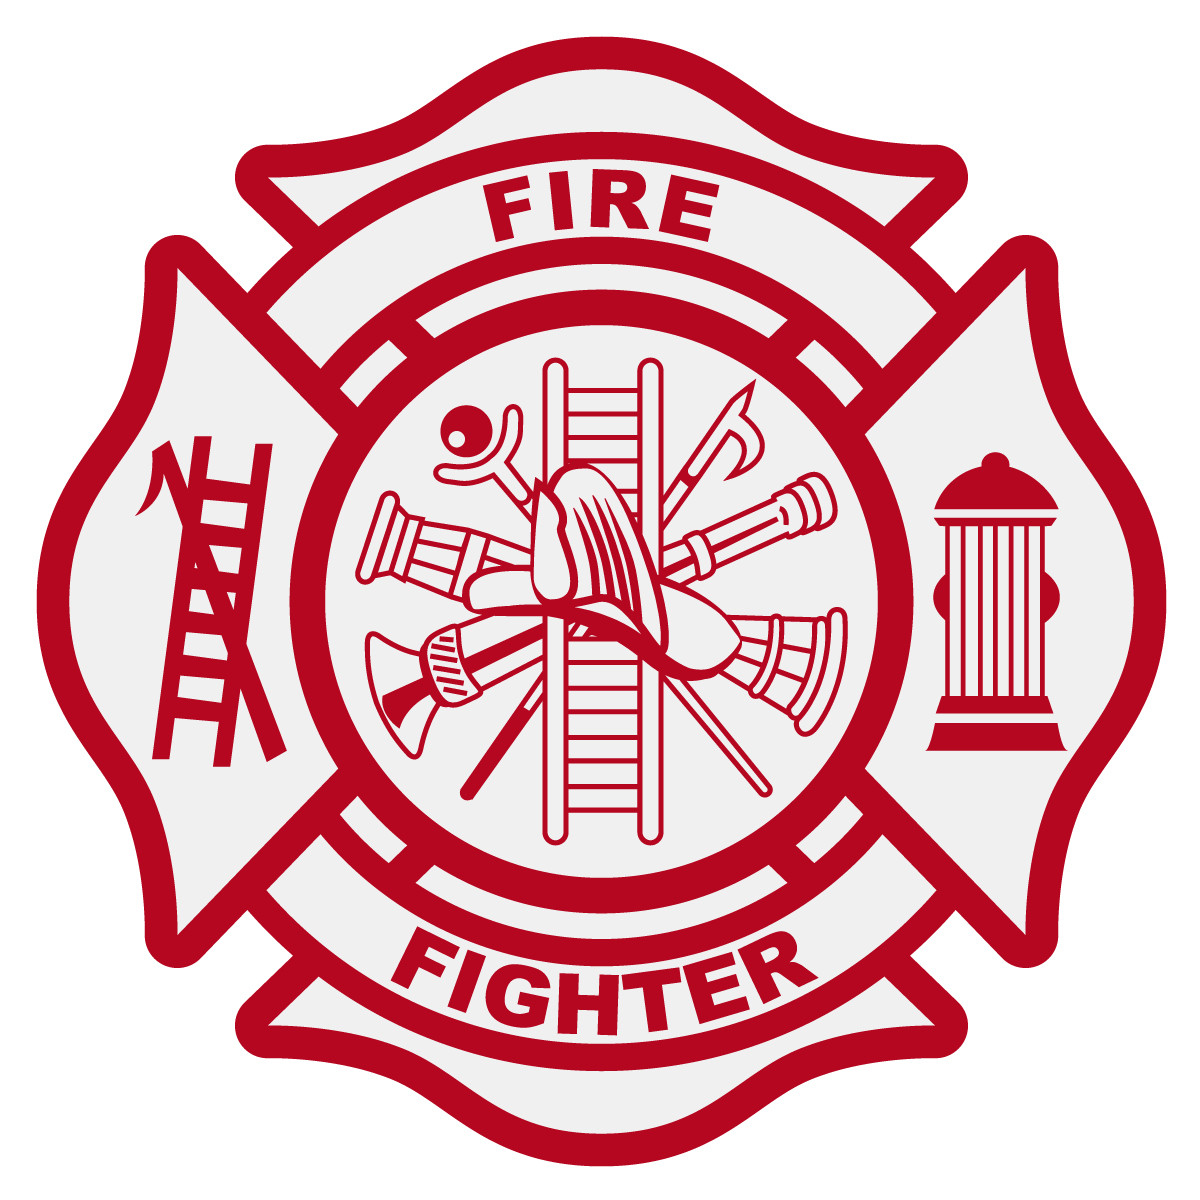 S2 Fire Fighter Maltese Cross Decal